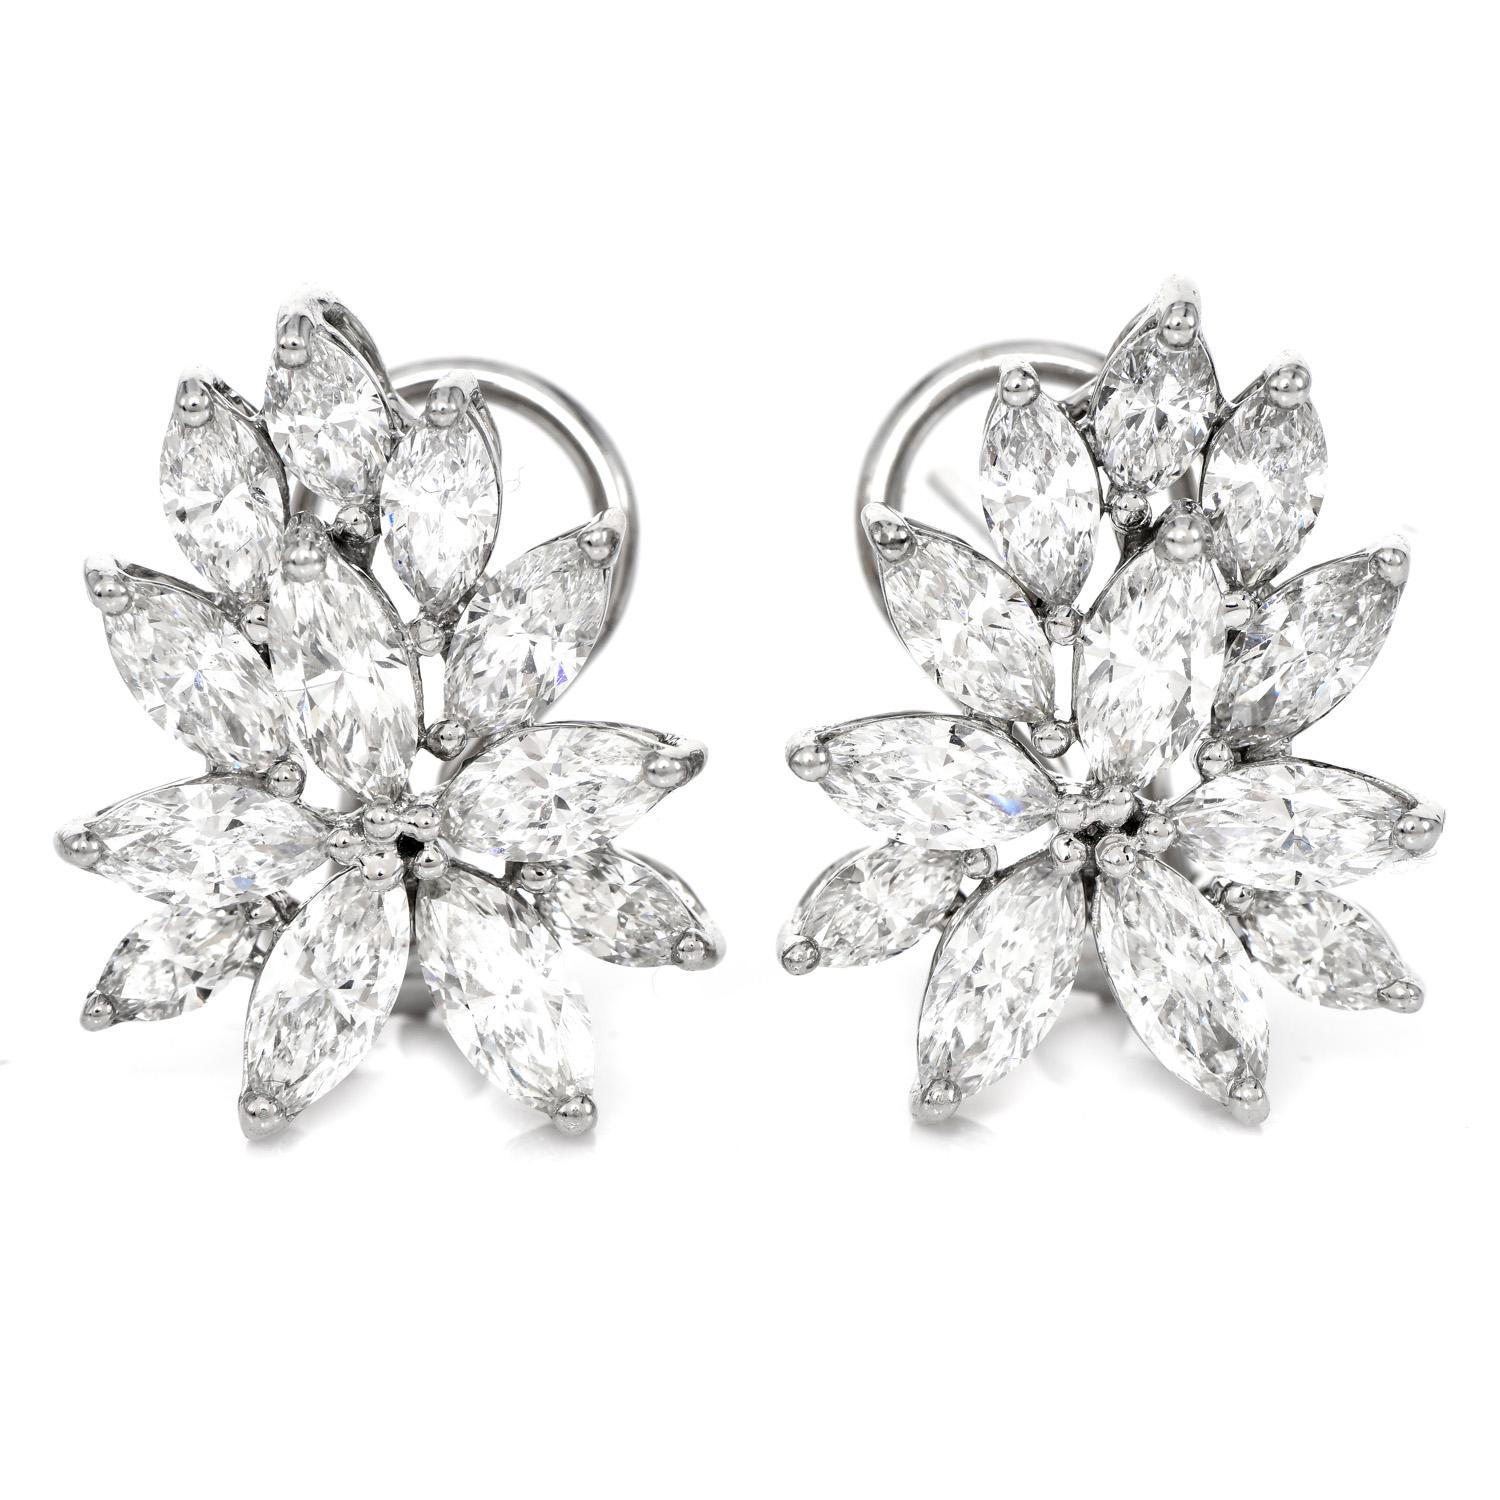 These highly sparkly earrings will continue to make you feel fancy and special.

The shimmer is boasting (24) genuine natural diamonds with marquise shape & prong-set, with  5.70 carats in total,  G-H color, and VS1-VS2 clarity. 

The backings are